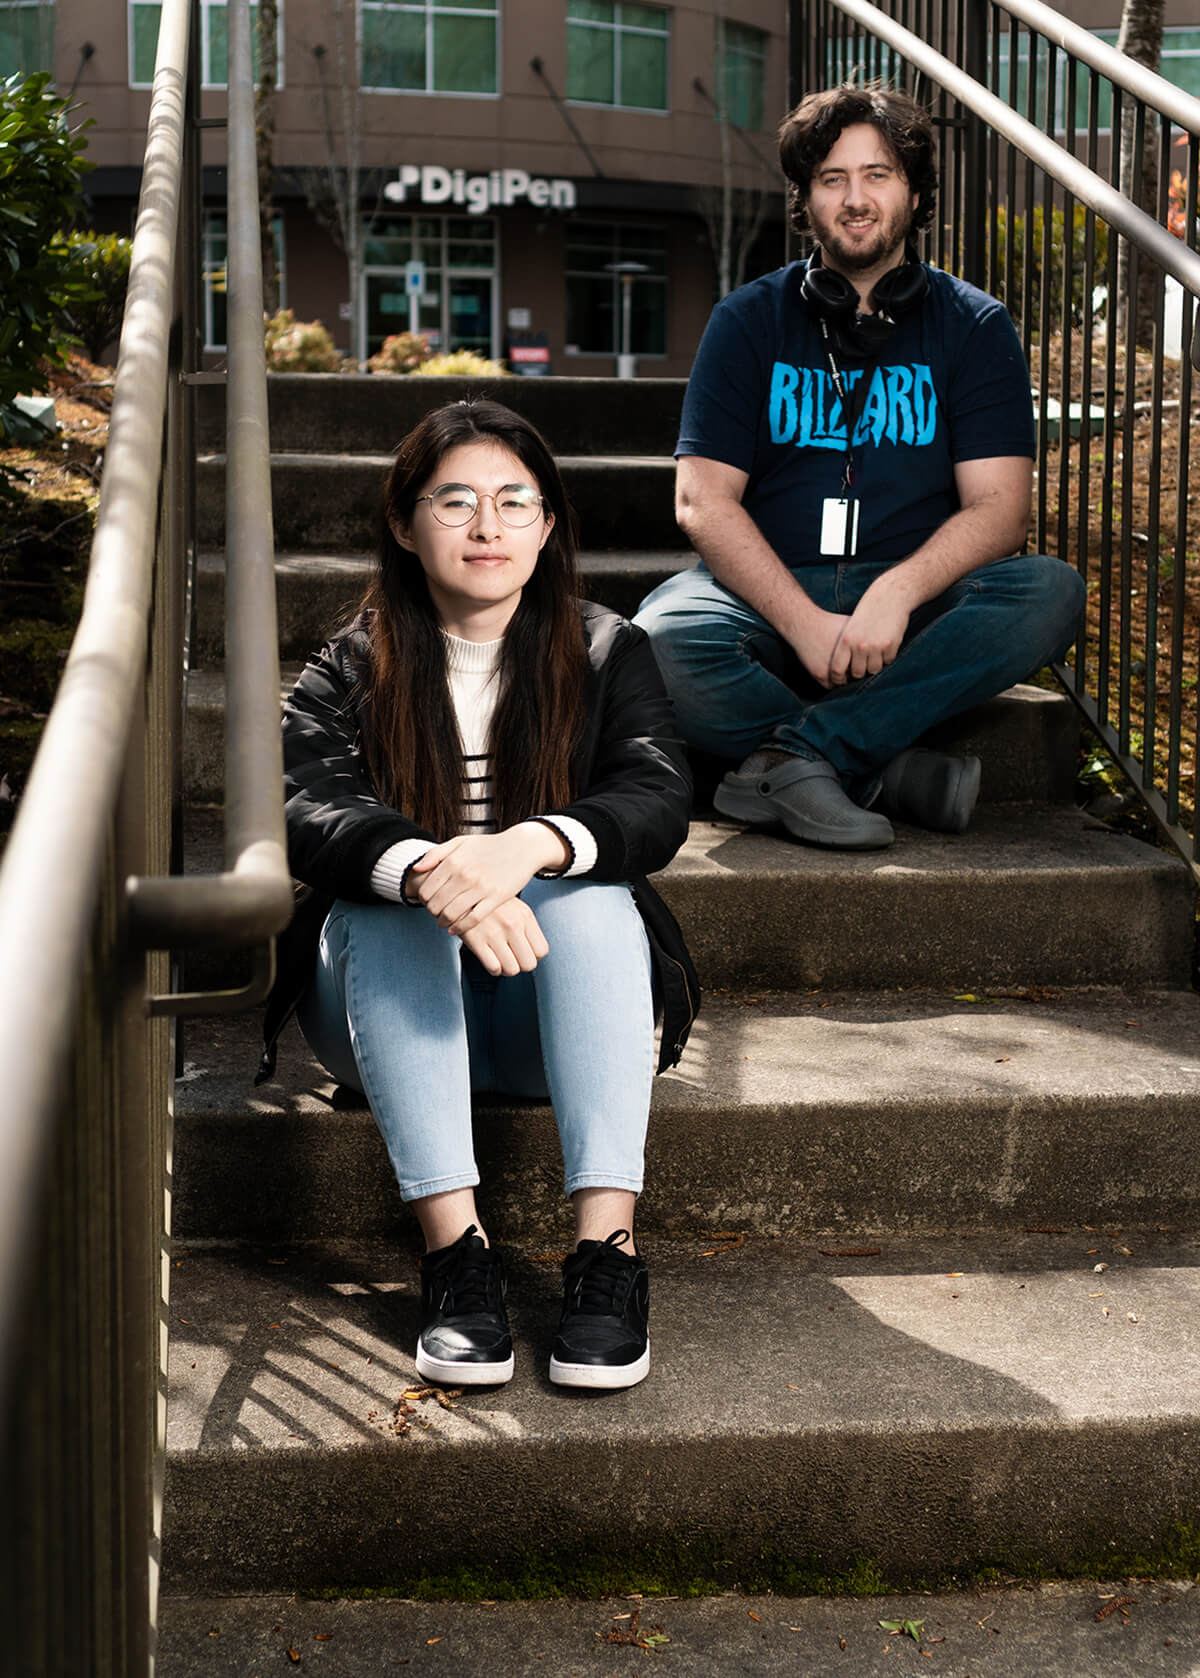 Students Joe Rouverol and Annie Hanson sit on concrete steps in front of DigiPen’s main building.